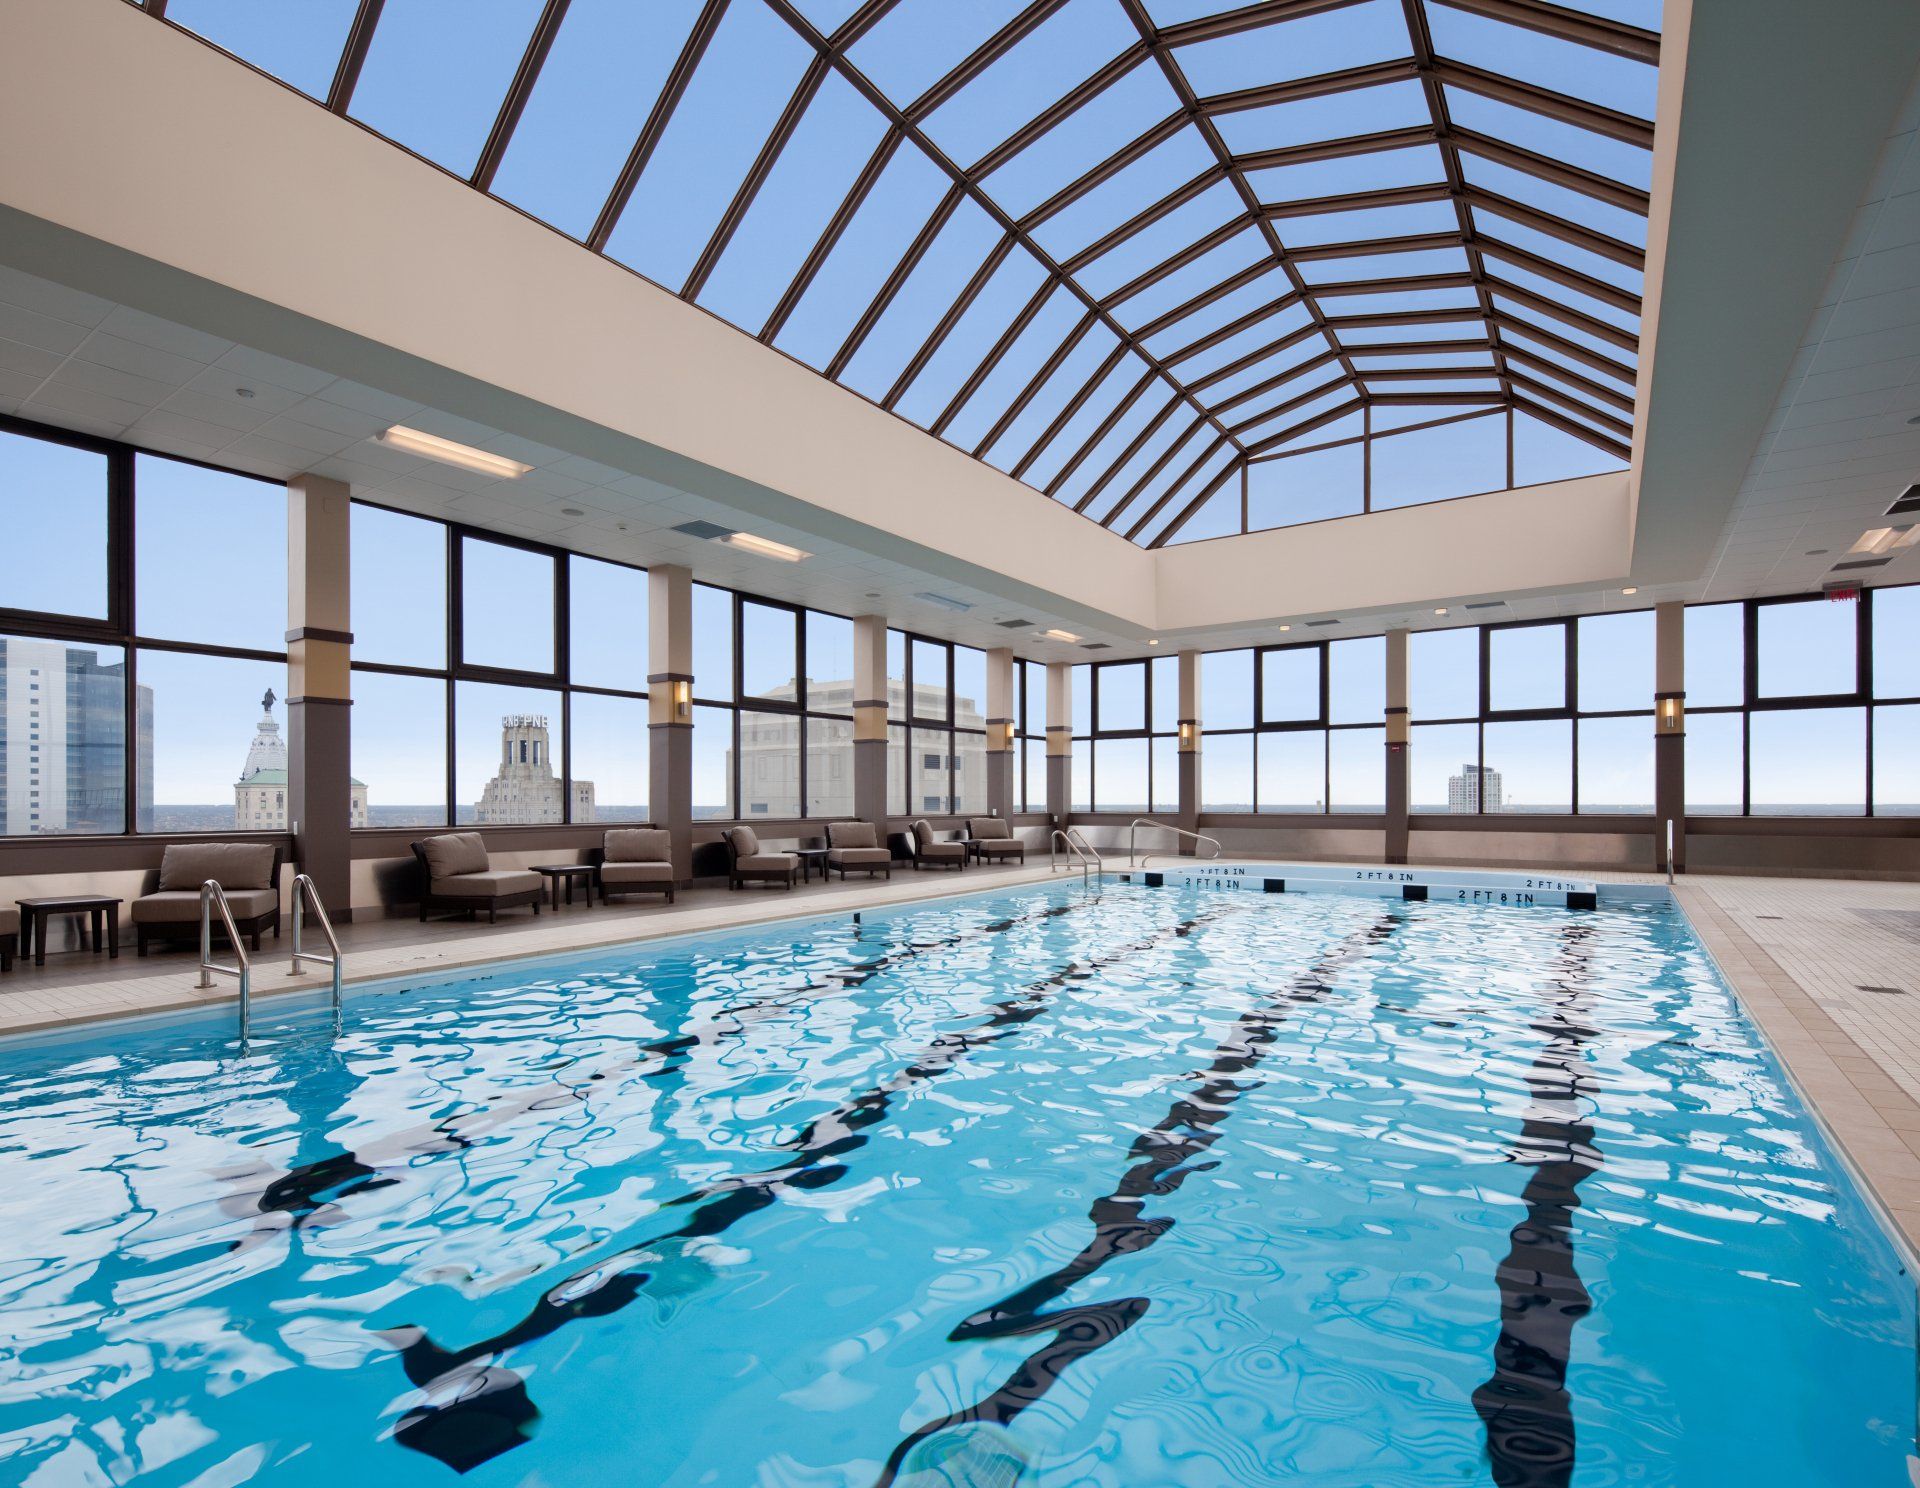 A large indoor swimming pool with a glass roof